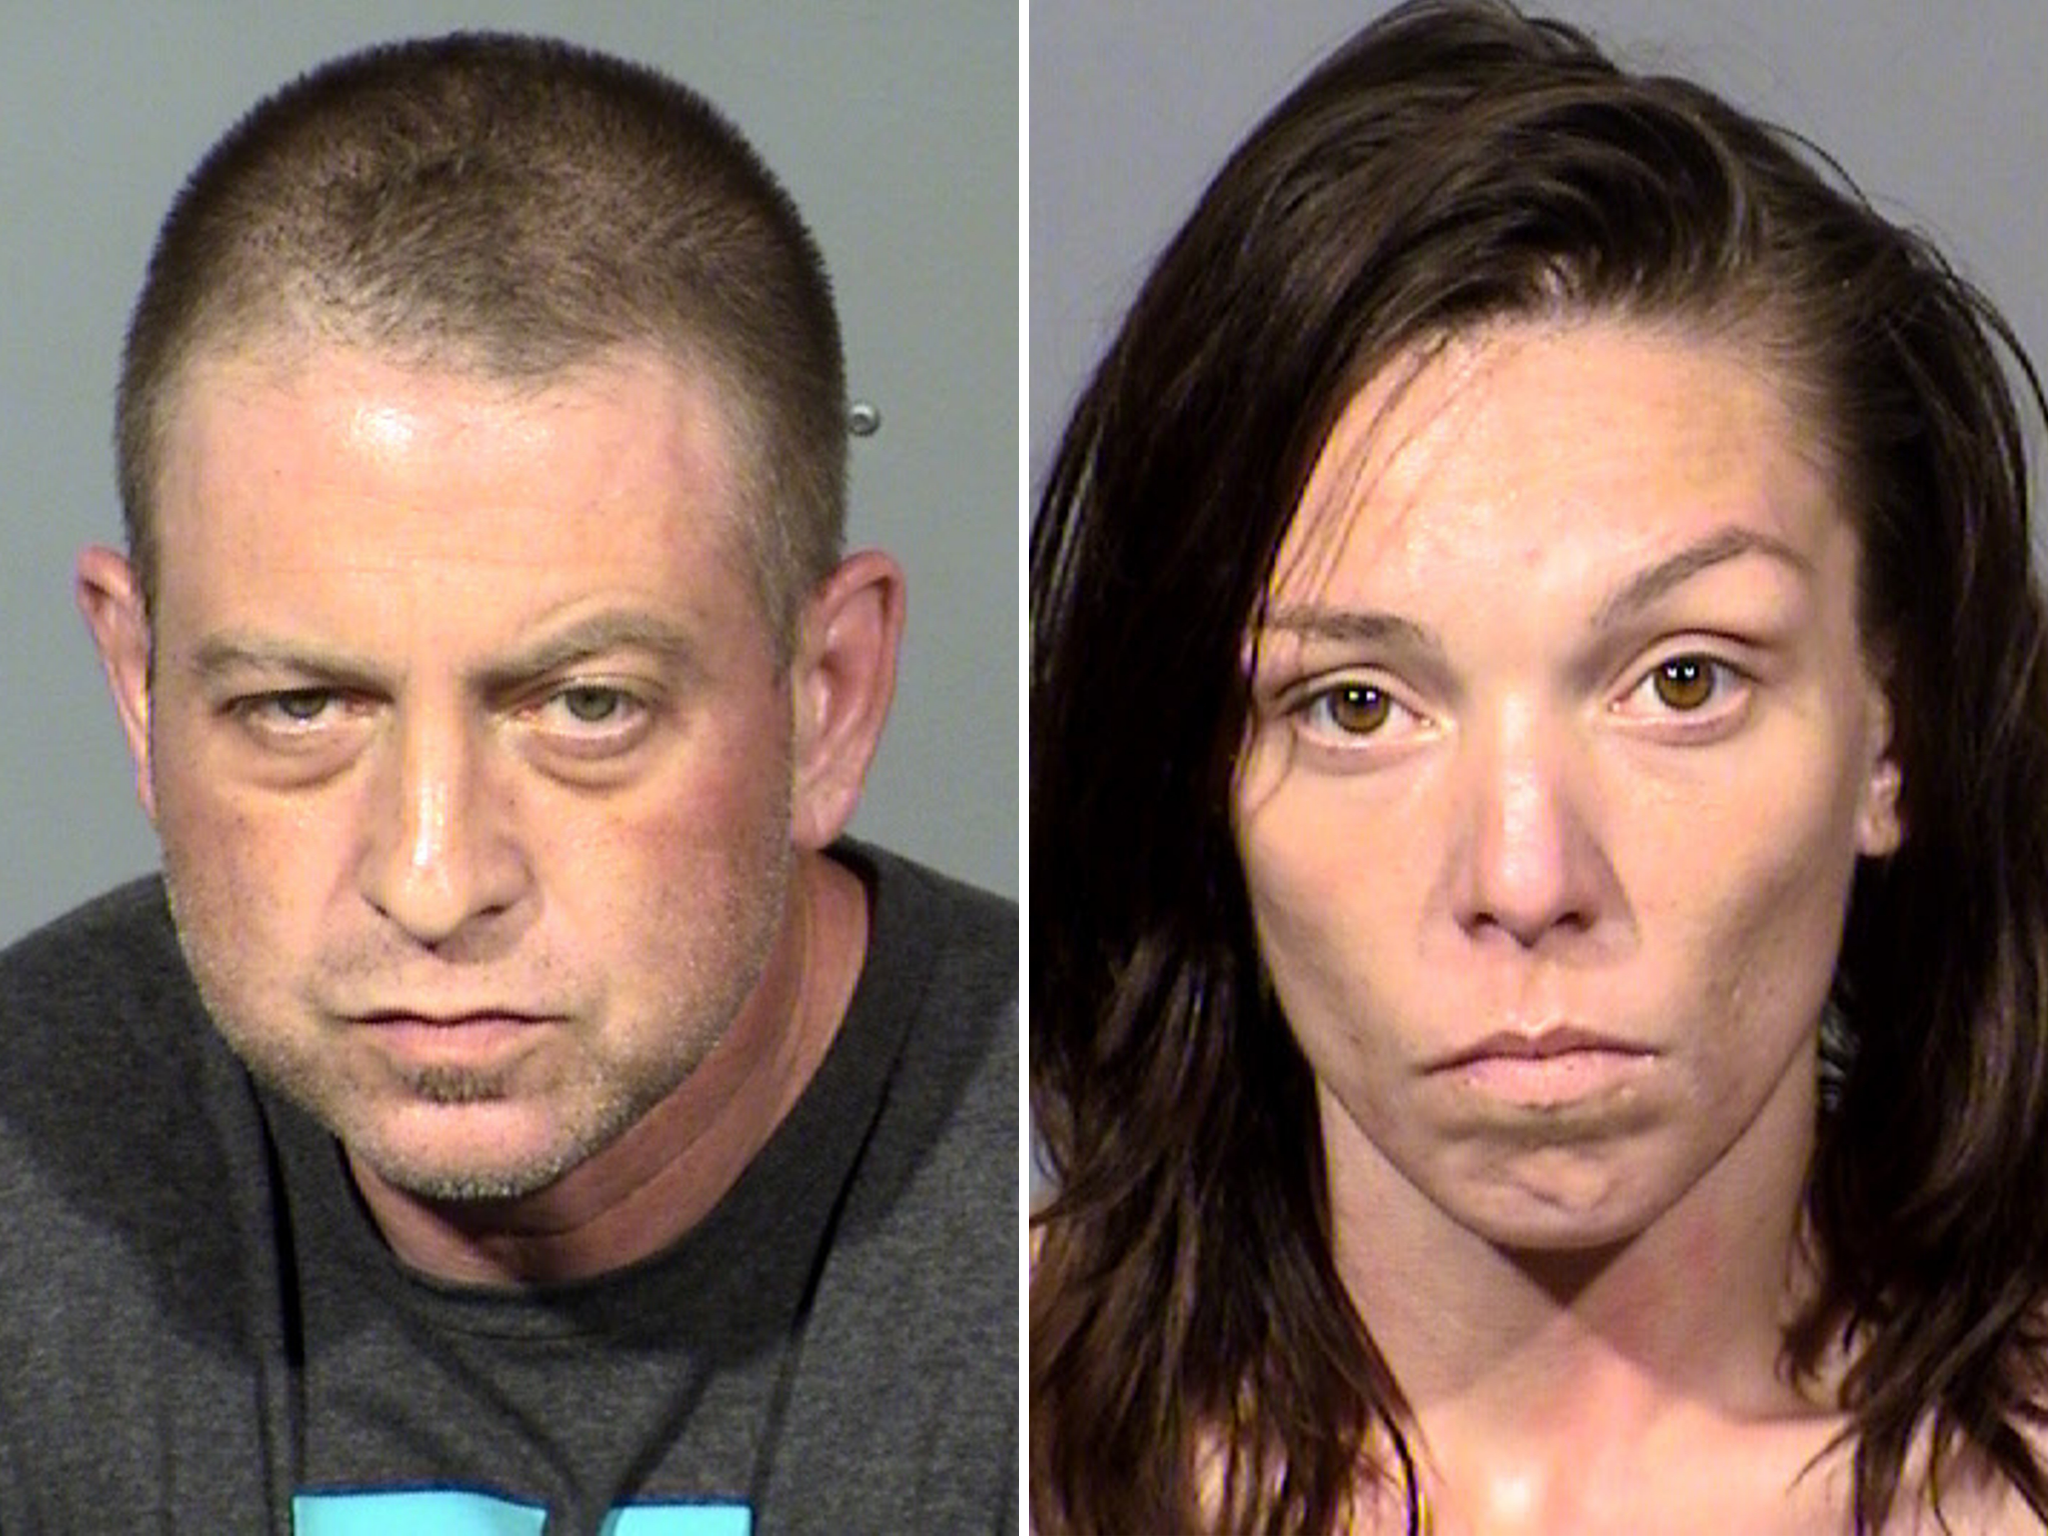 Christopher Prestipino (left) has been charged with murder and kidnapping, while Lisa Mort (right) faces charges for allegedly aiding a felony (Las Vegas Metropolitan Police Department )